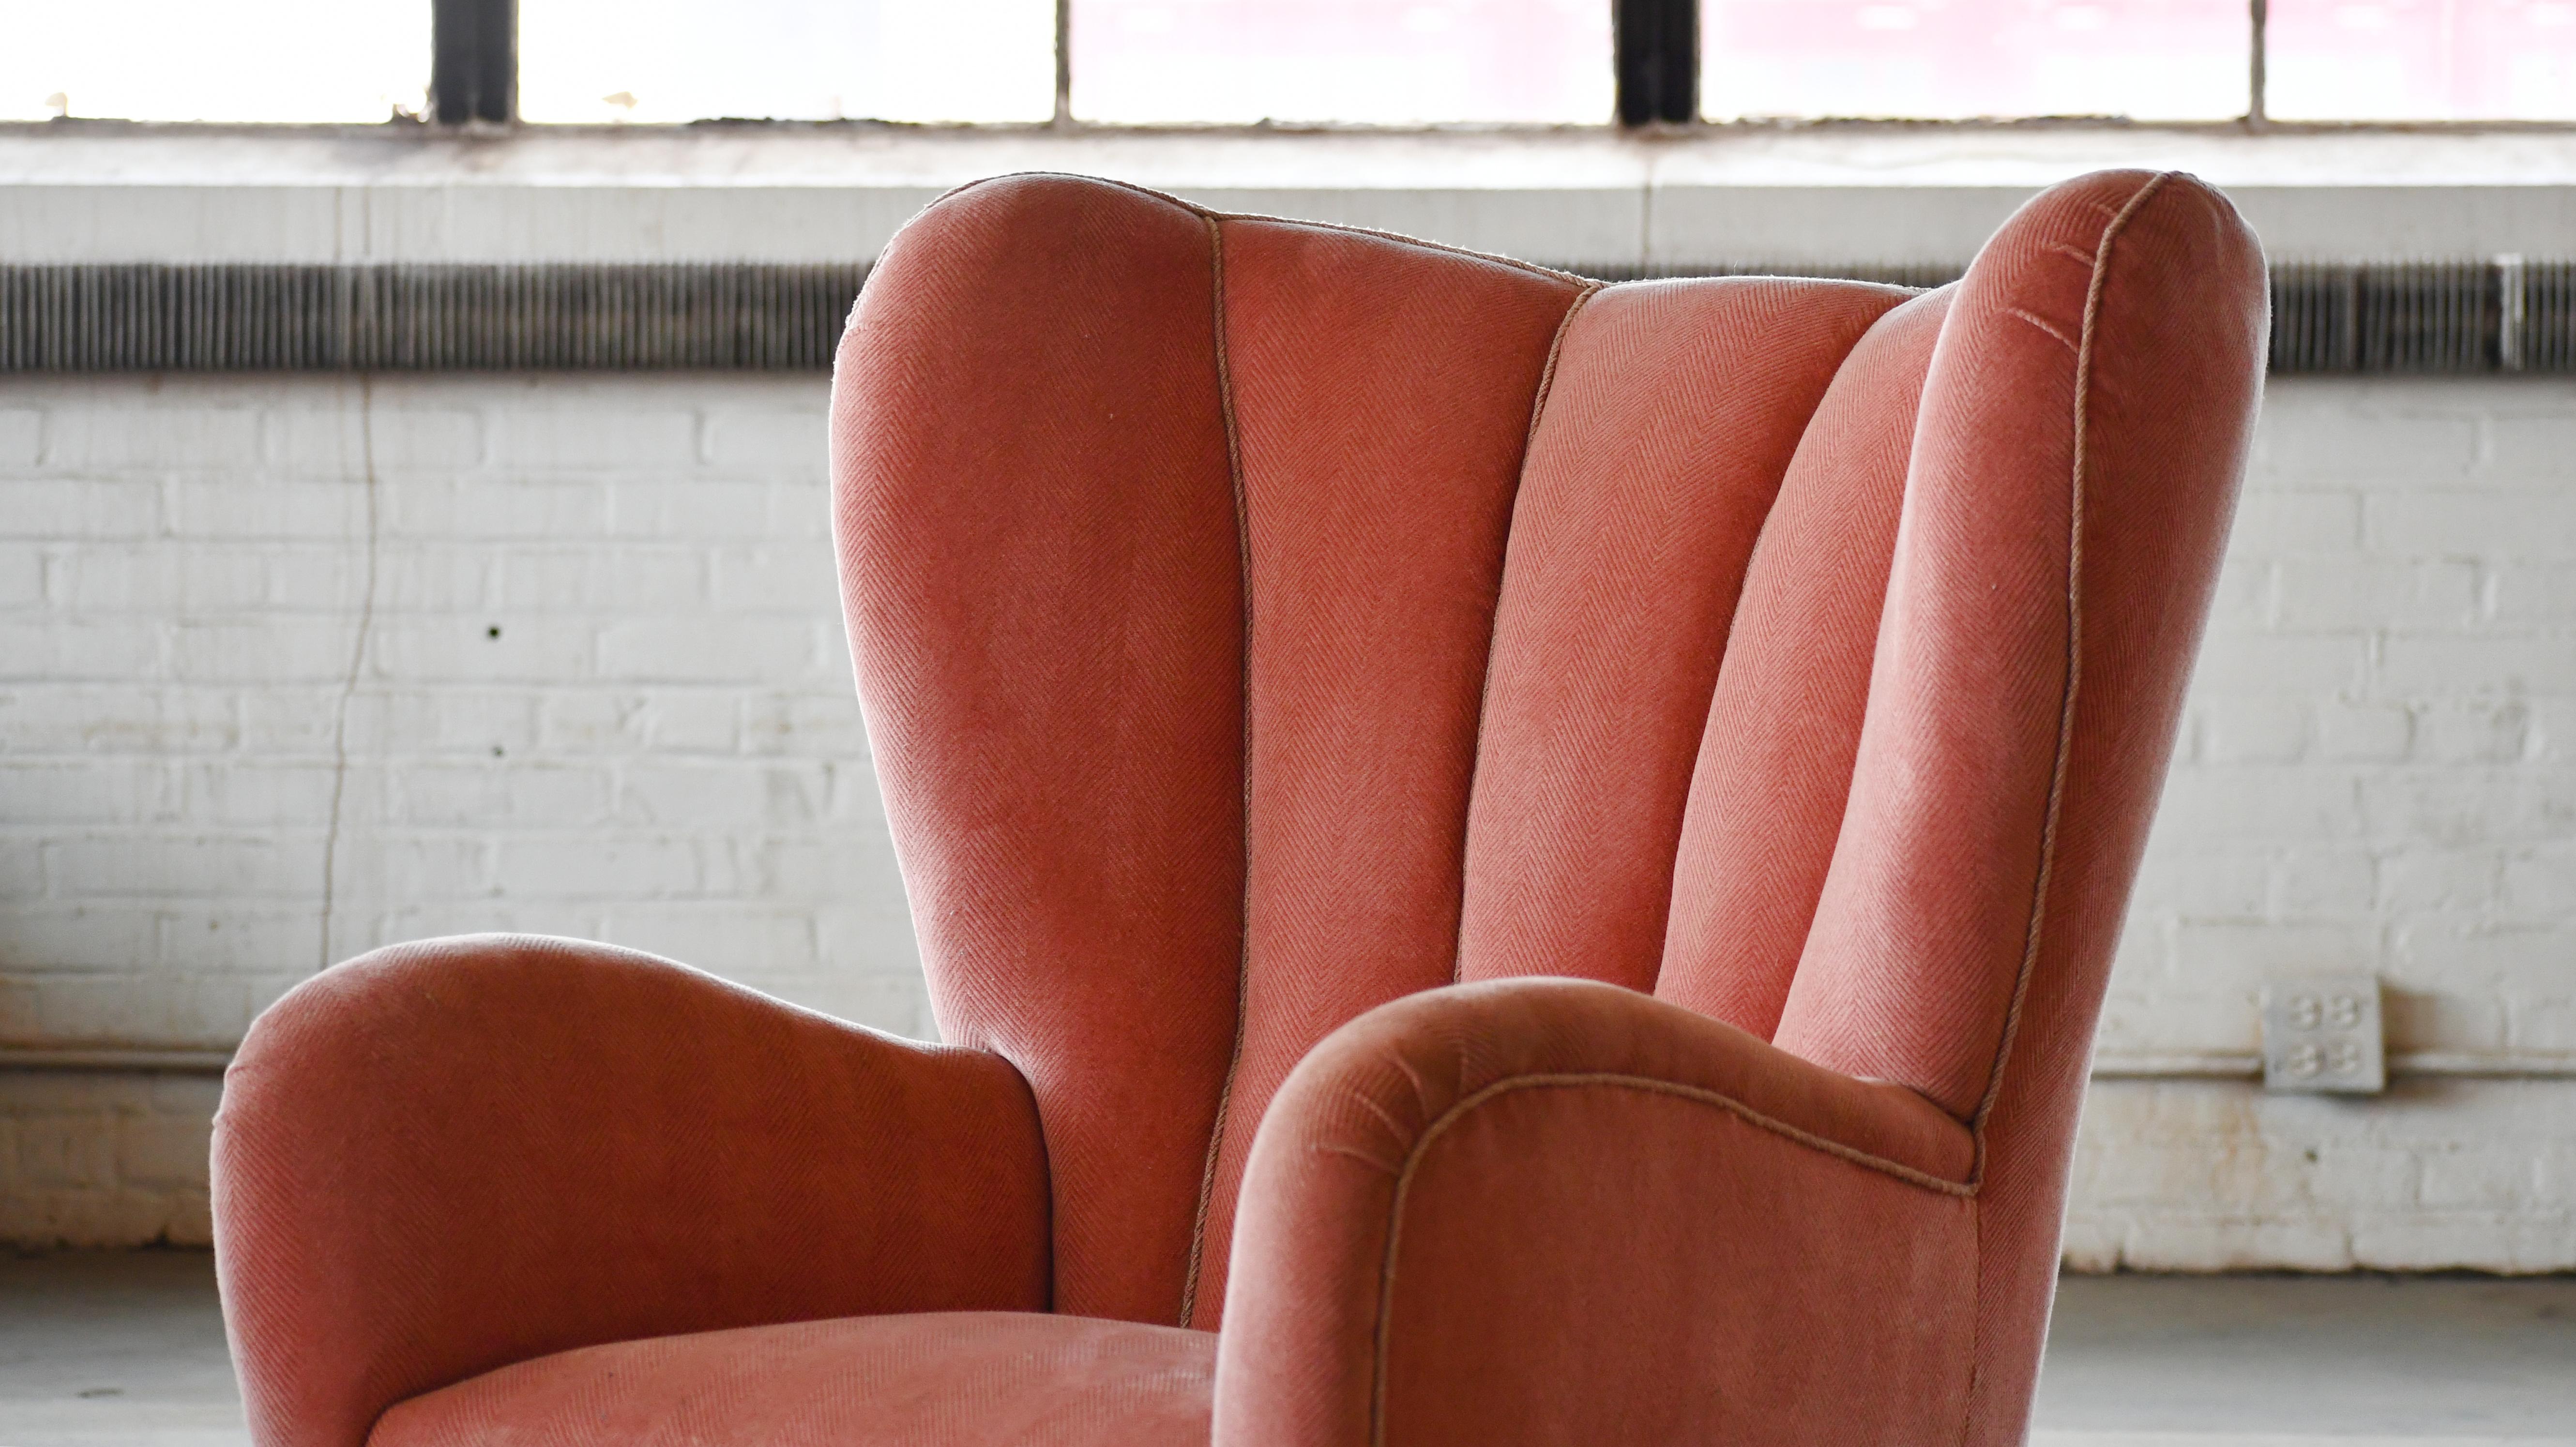 Large Danish 1940's Channelback Lounge Chair in Pink Mohair Round Organic Shape In Good Condition For Sale In Bridgeport, CT